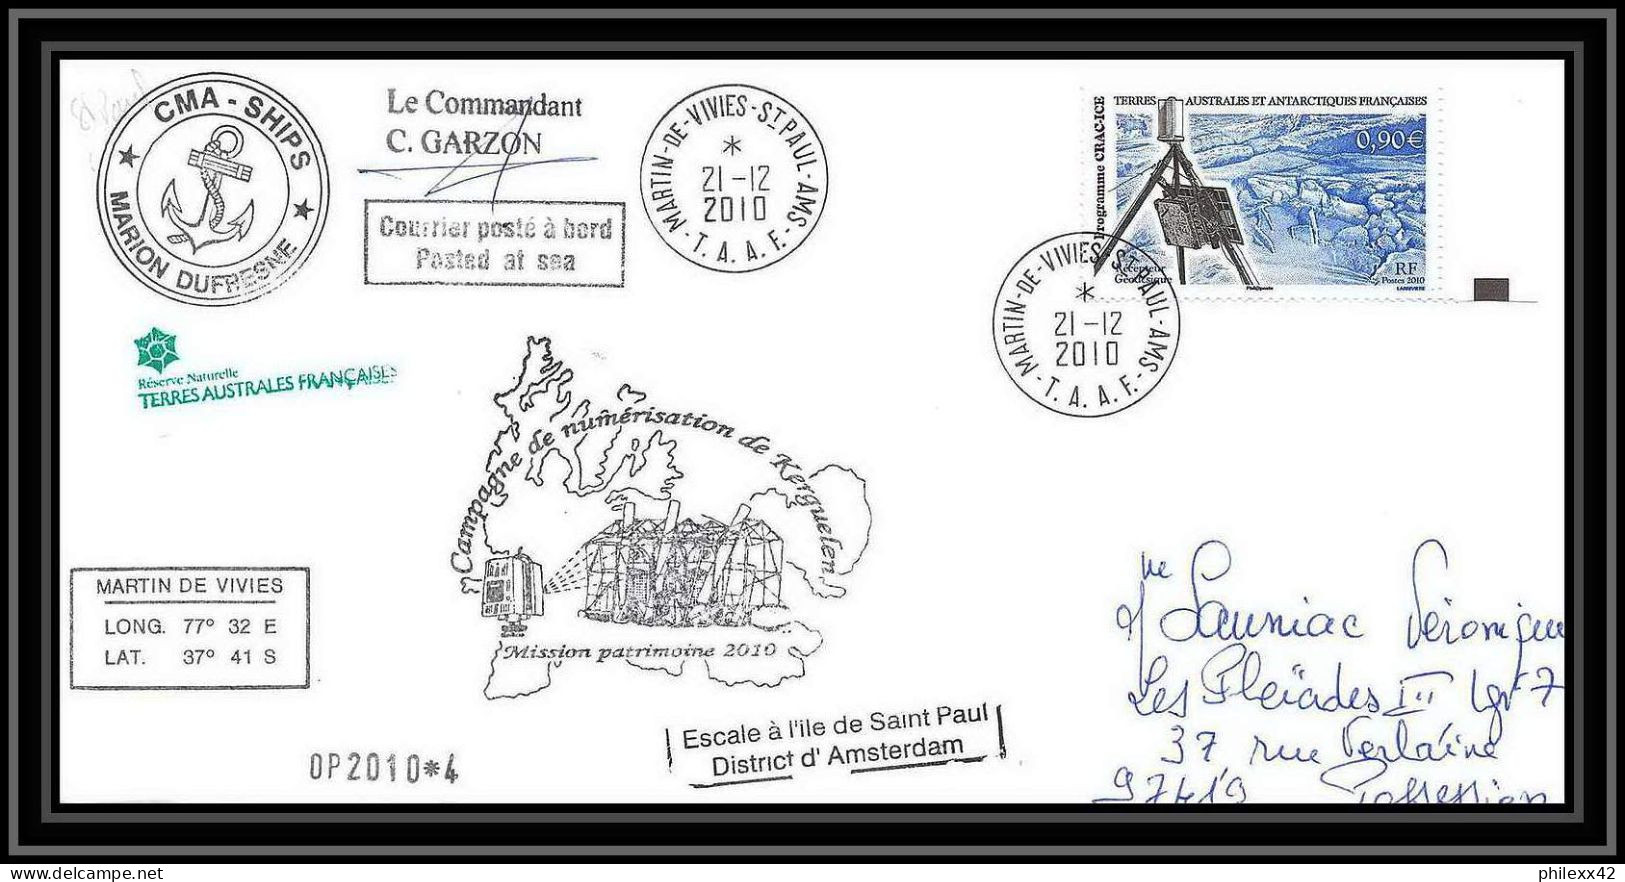 3062 Helilagon Dufresne Signé Signed Op 2010/4 St Paul 21/12/2010 N°559 ANTARCTIC Terres Australes (taaf) Lettre Cover - Helicópteros